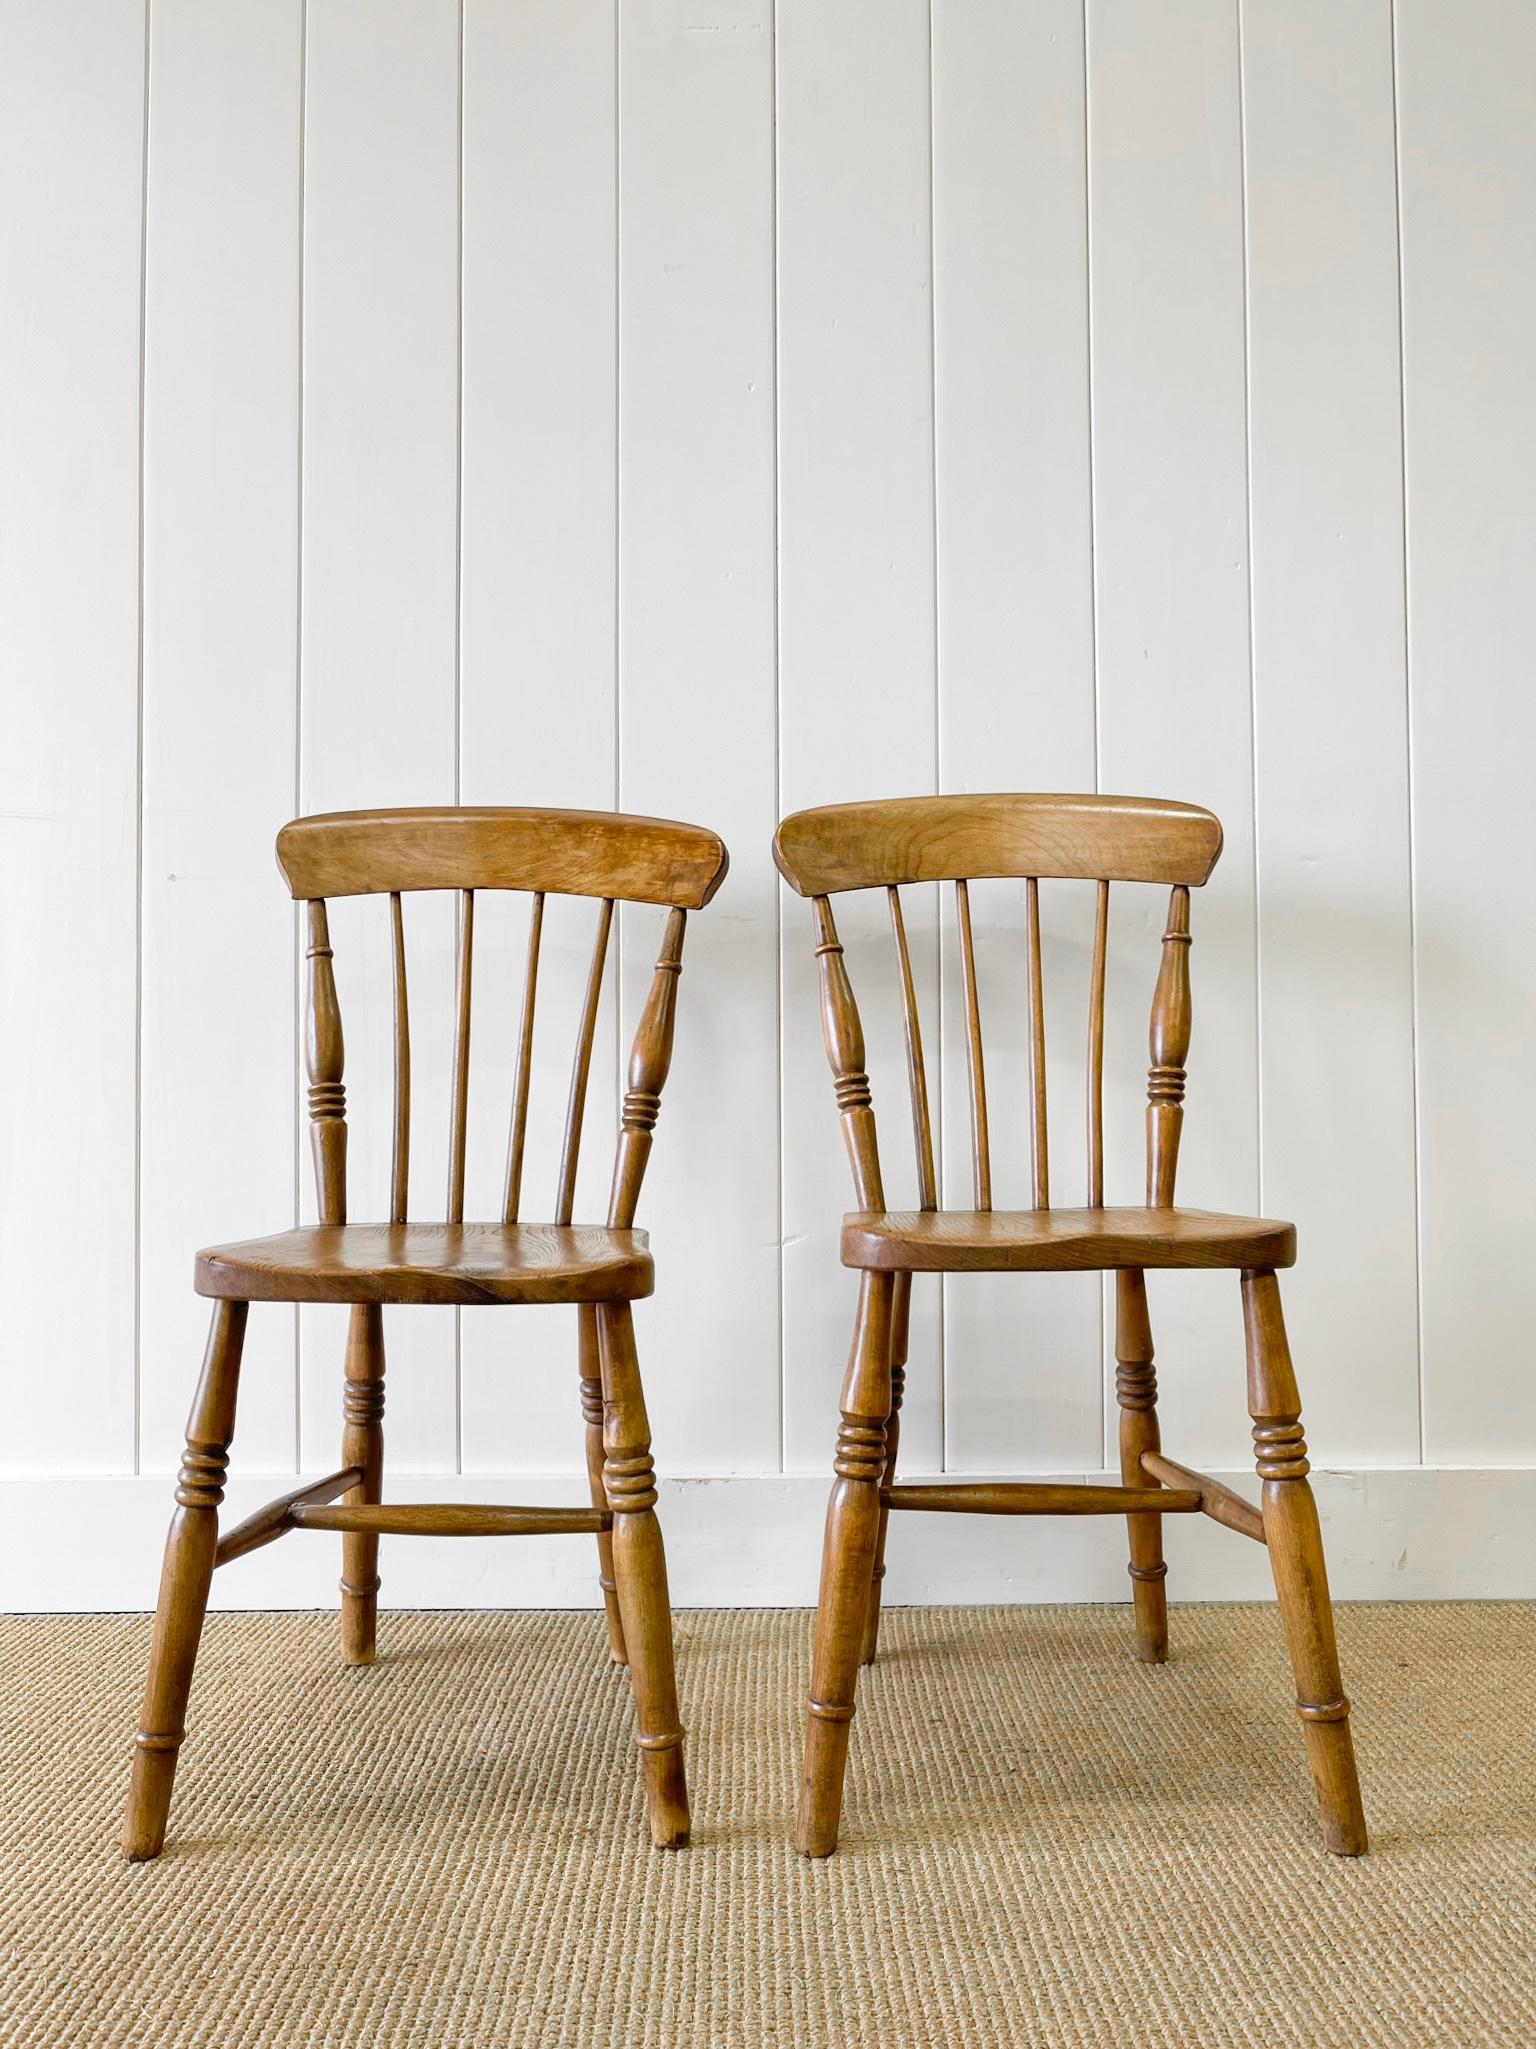 A good set of antique ash spindle back side chairs. Very solidly built in the traditional way.  Handsome profiles and good and heavy.  Perfect around a farmhouse table! Solid in joint. Beautiful figure in the wood, particularly the seats and back